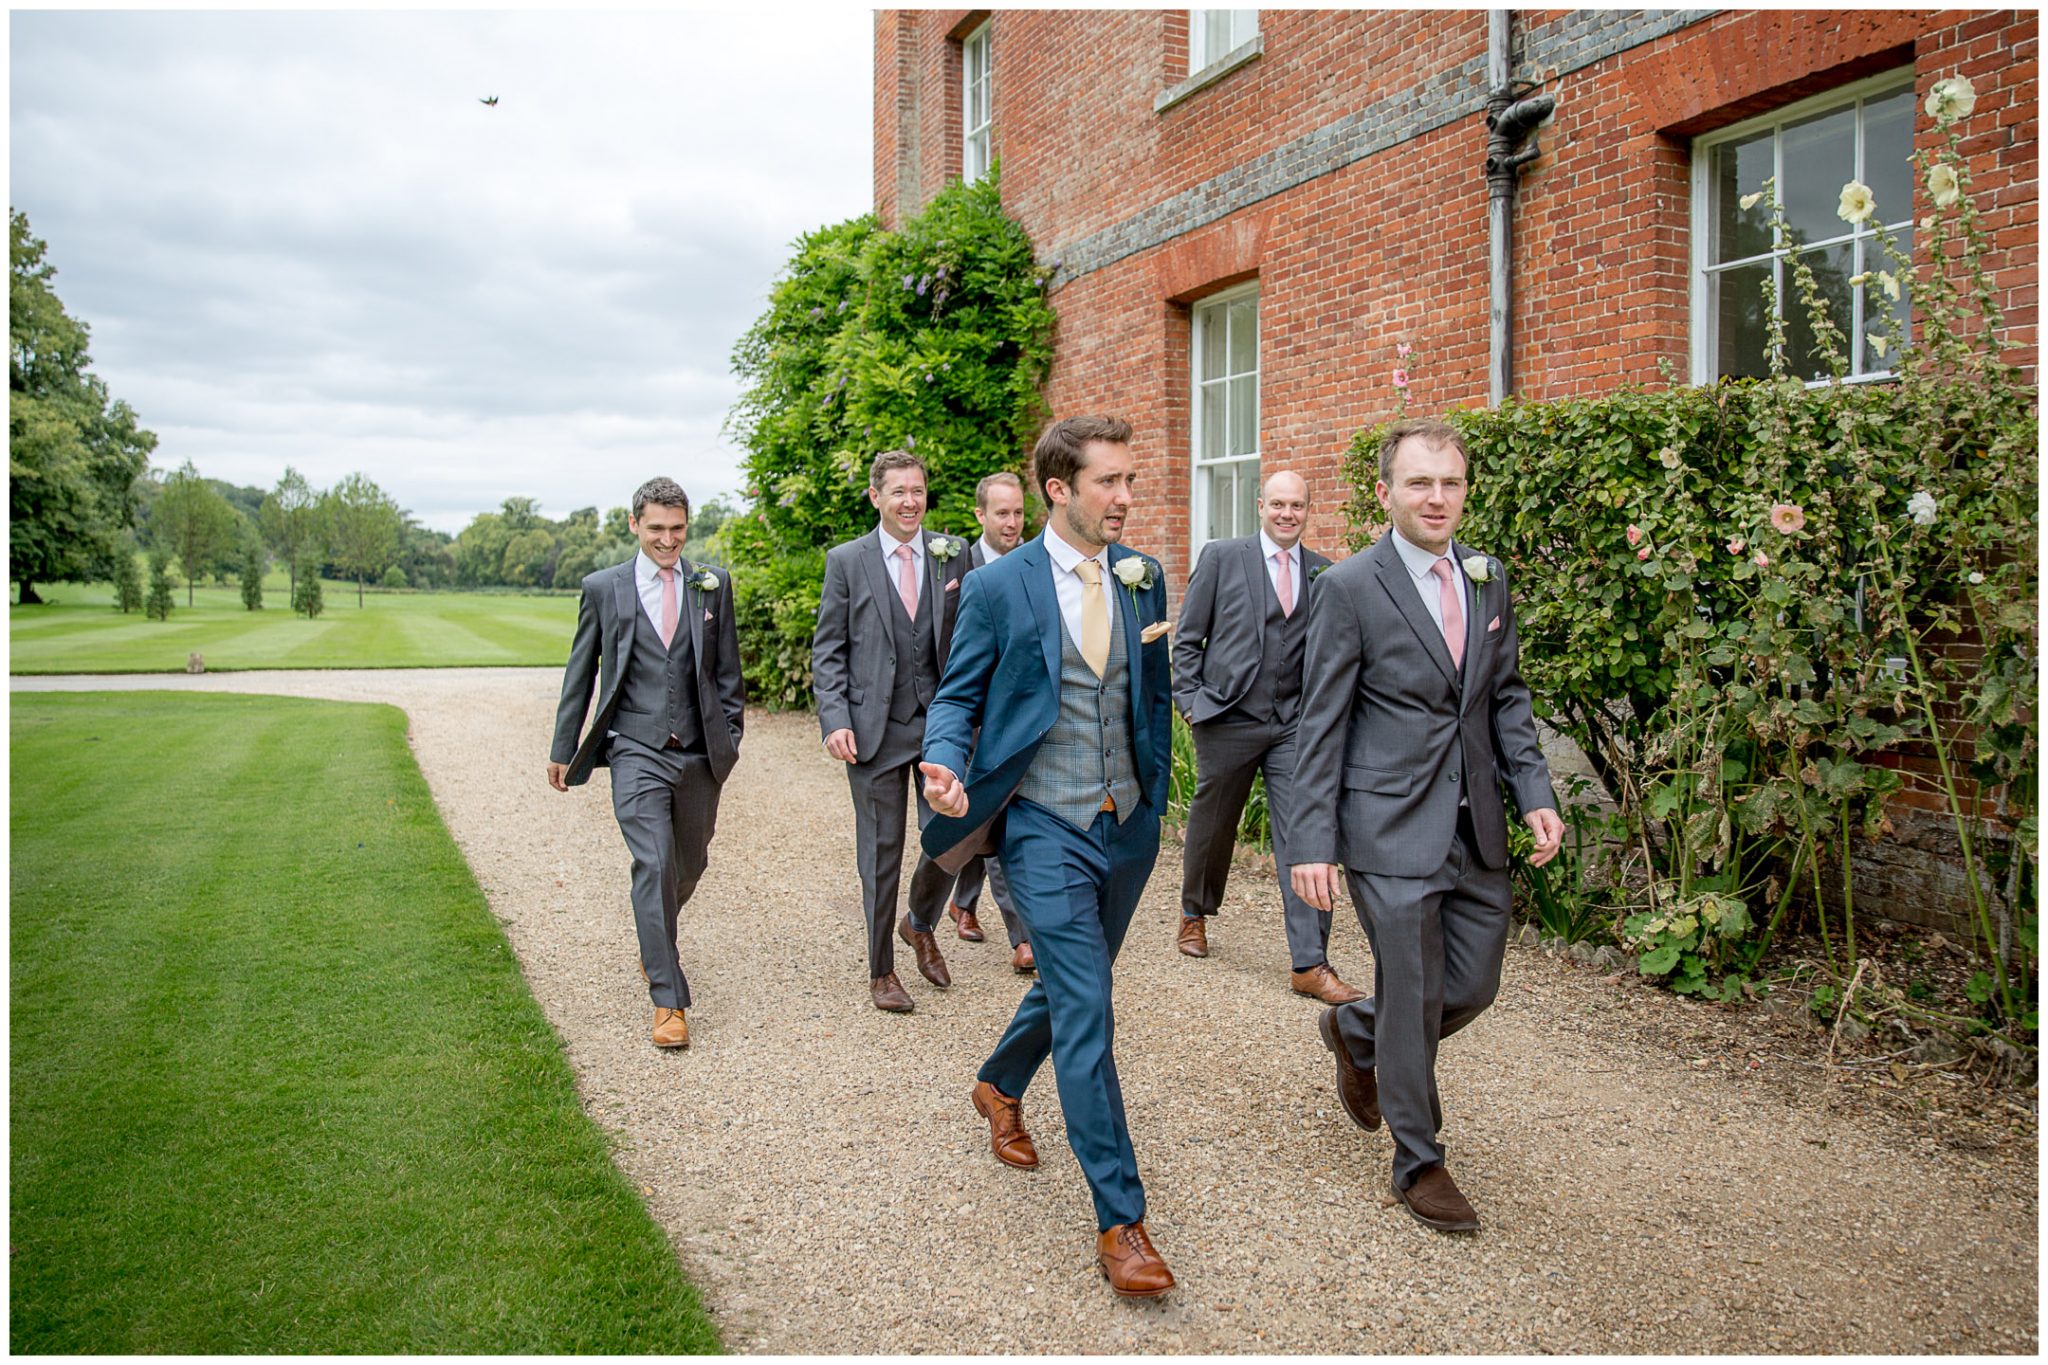 Groom, best man and ushers walk around the wedding venue towards the outdoor ceremony space